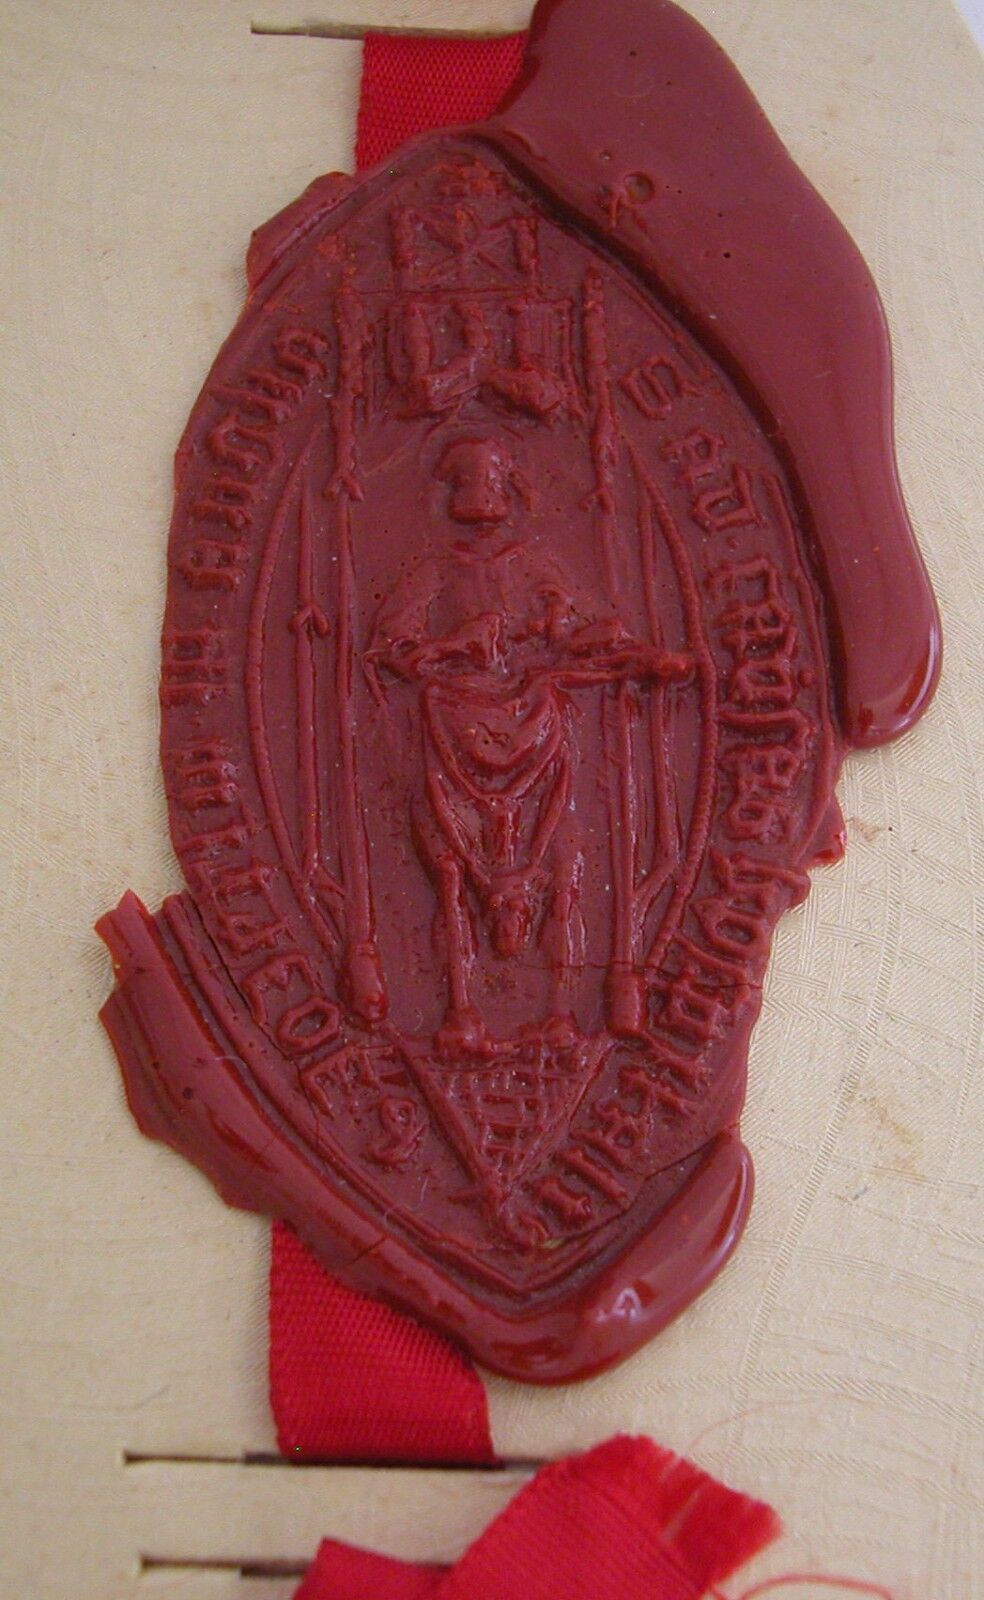 AN IMPRESSION OF THE LOST SEAL OF THE KNIGHTS OF ST.JOHN OF JERUSALEM 15TH CENTU